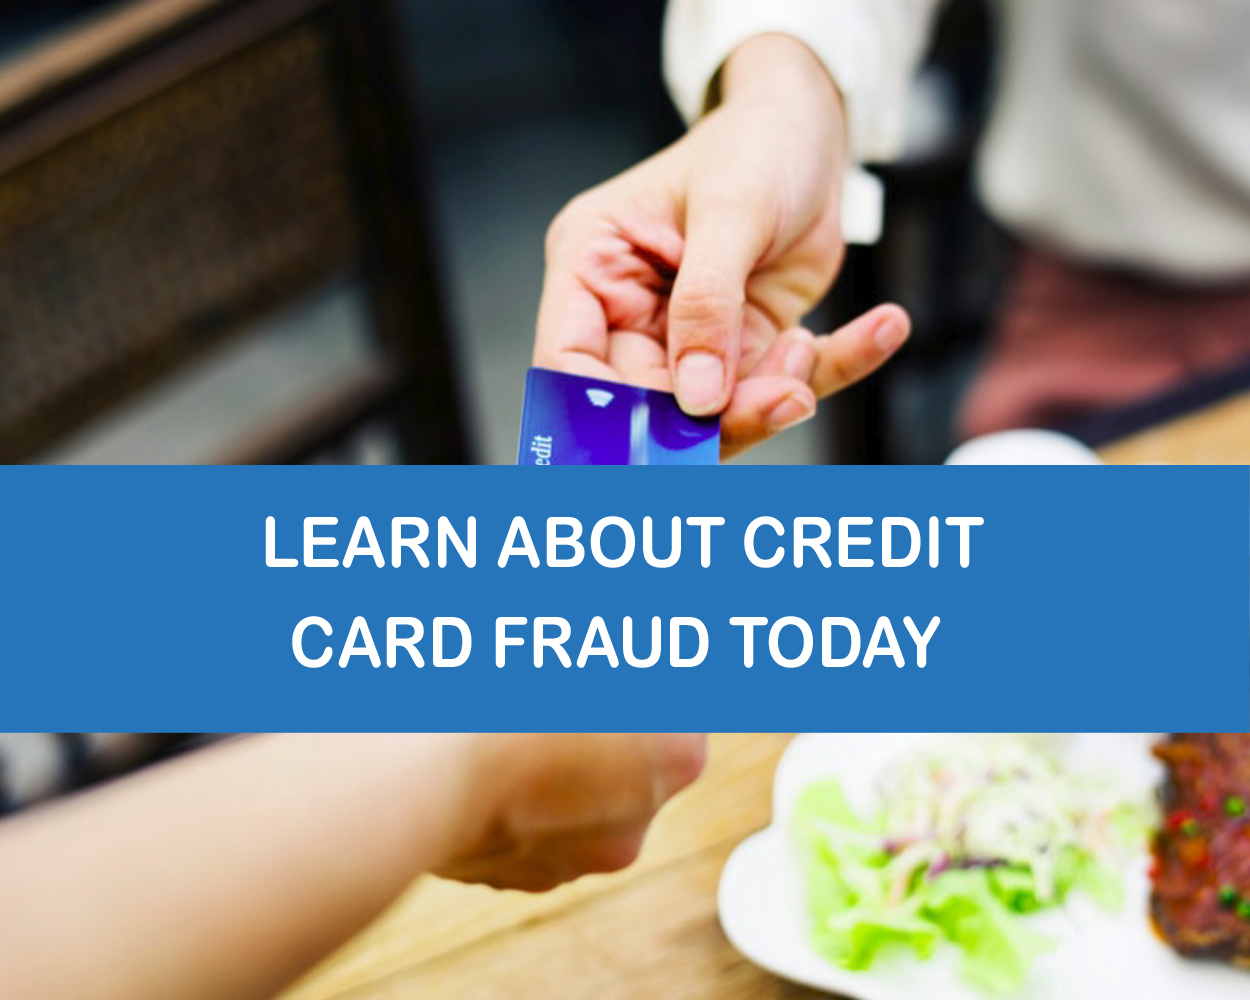 To learn about credit card fraud click here